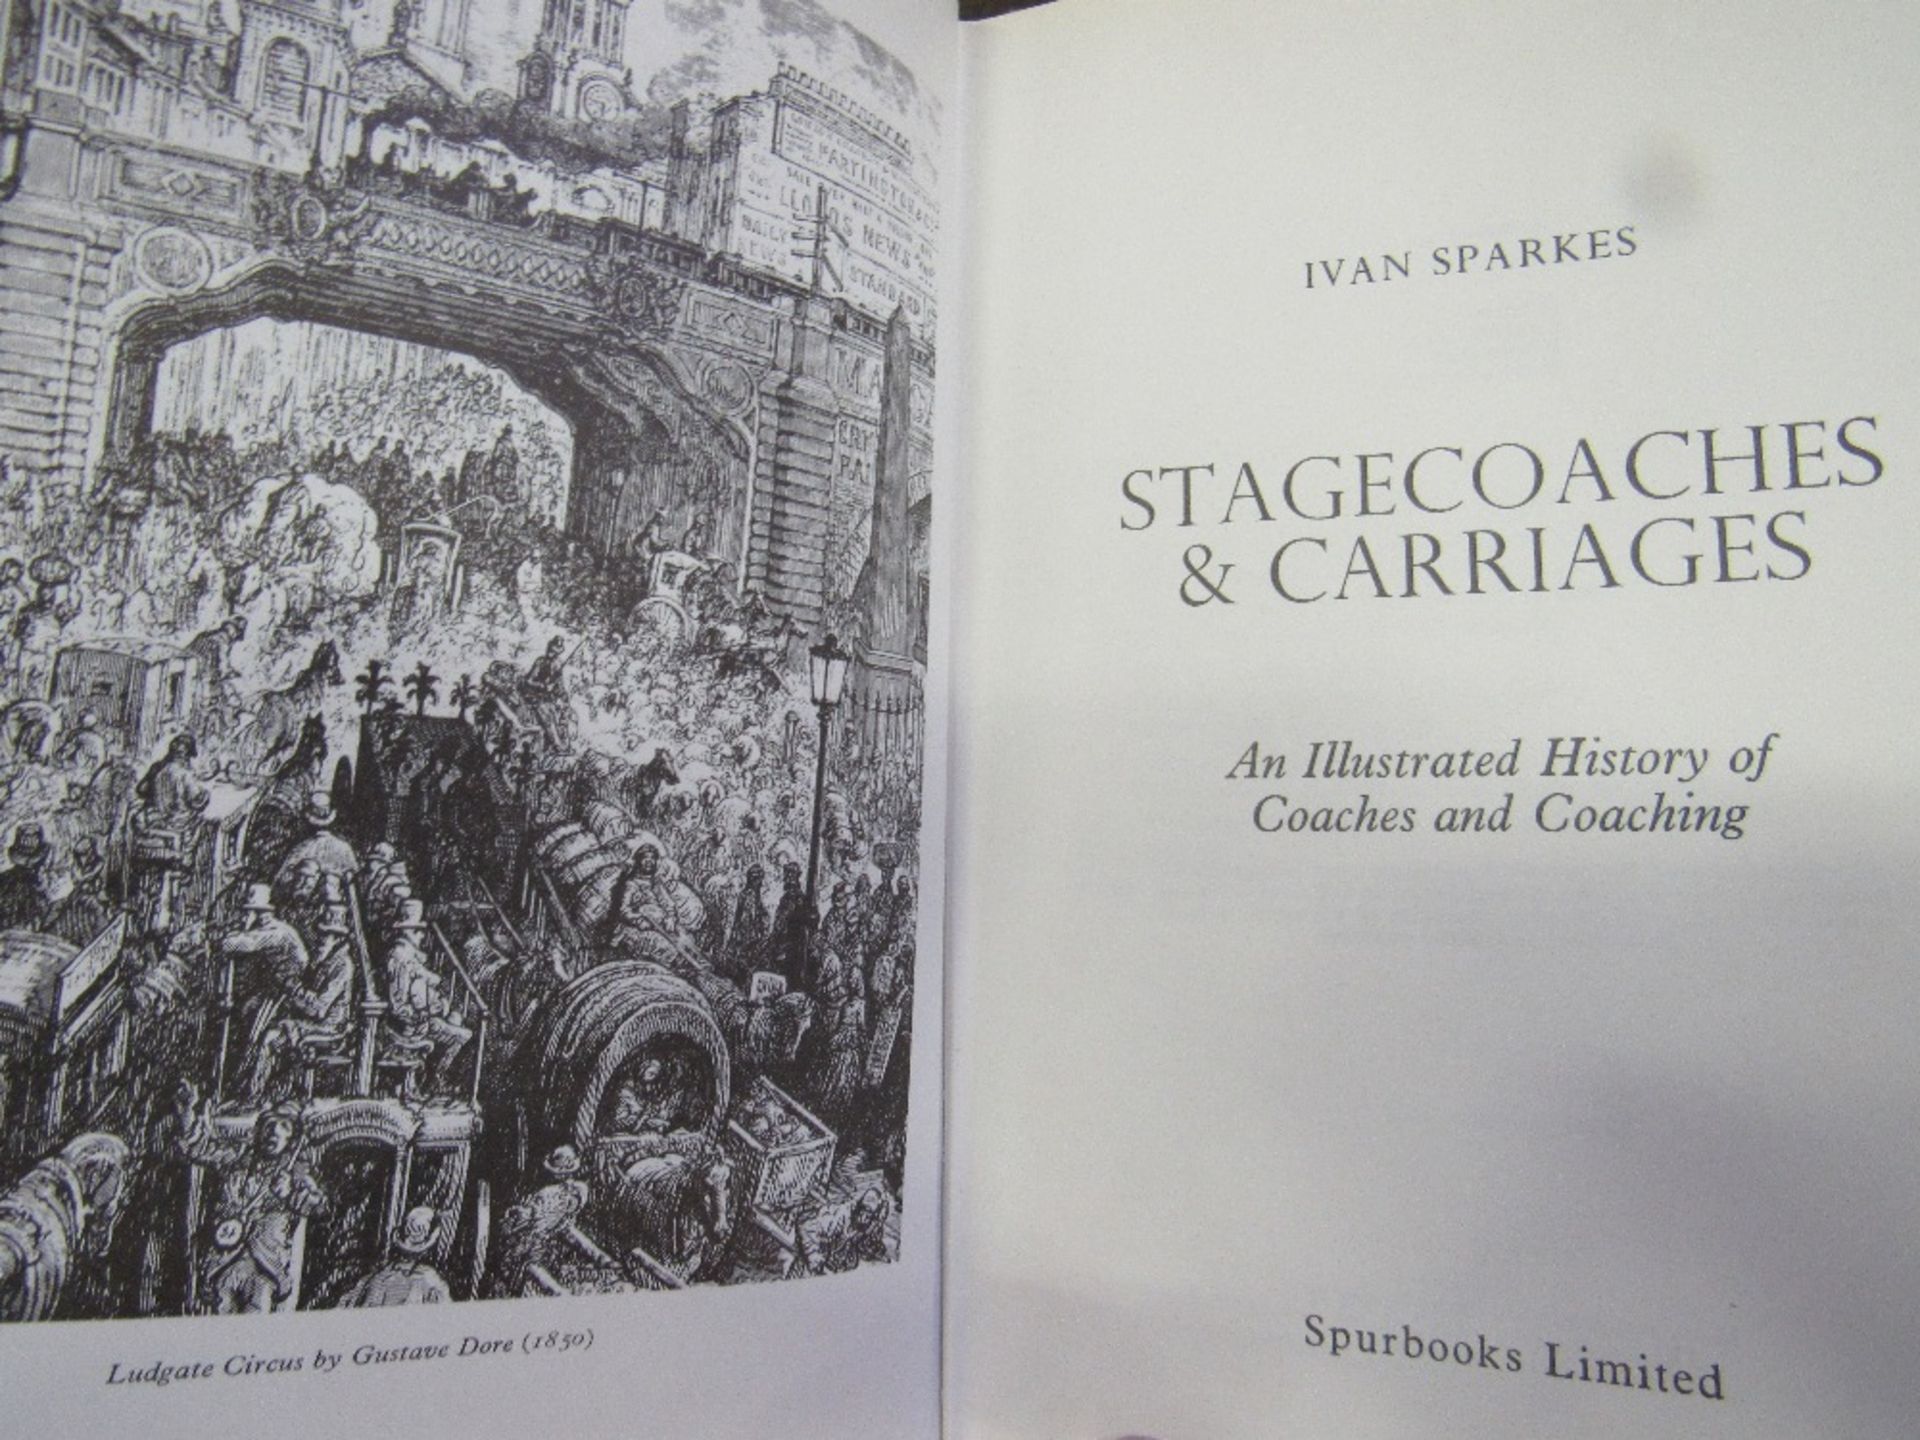 Sparks, Ivan: Stagecoaches & Carriages, an Illustrated History of Coaches and Coaching; 1975.